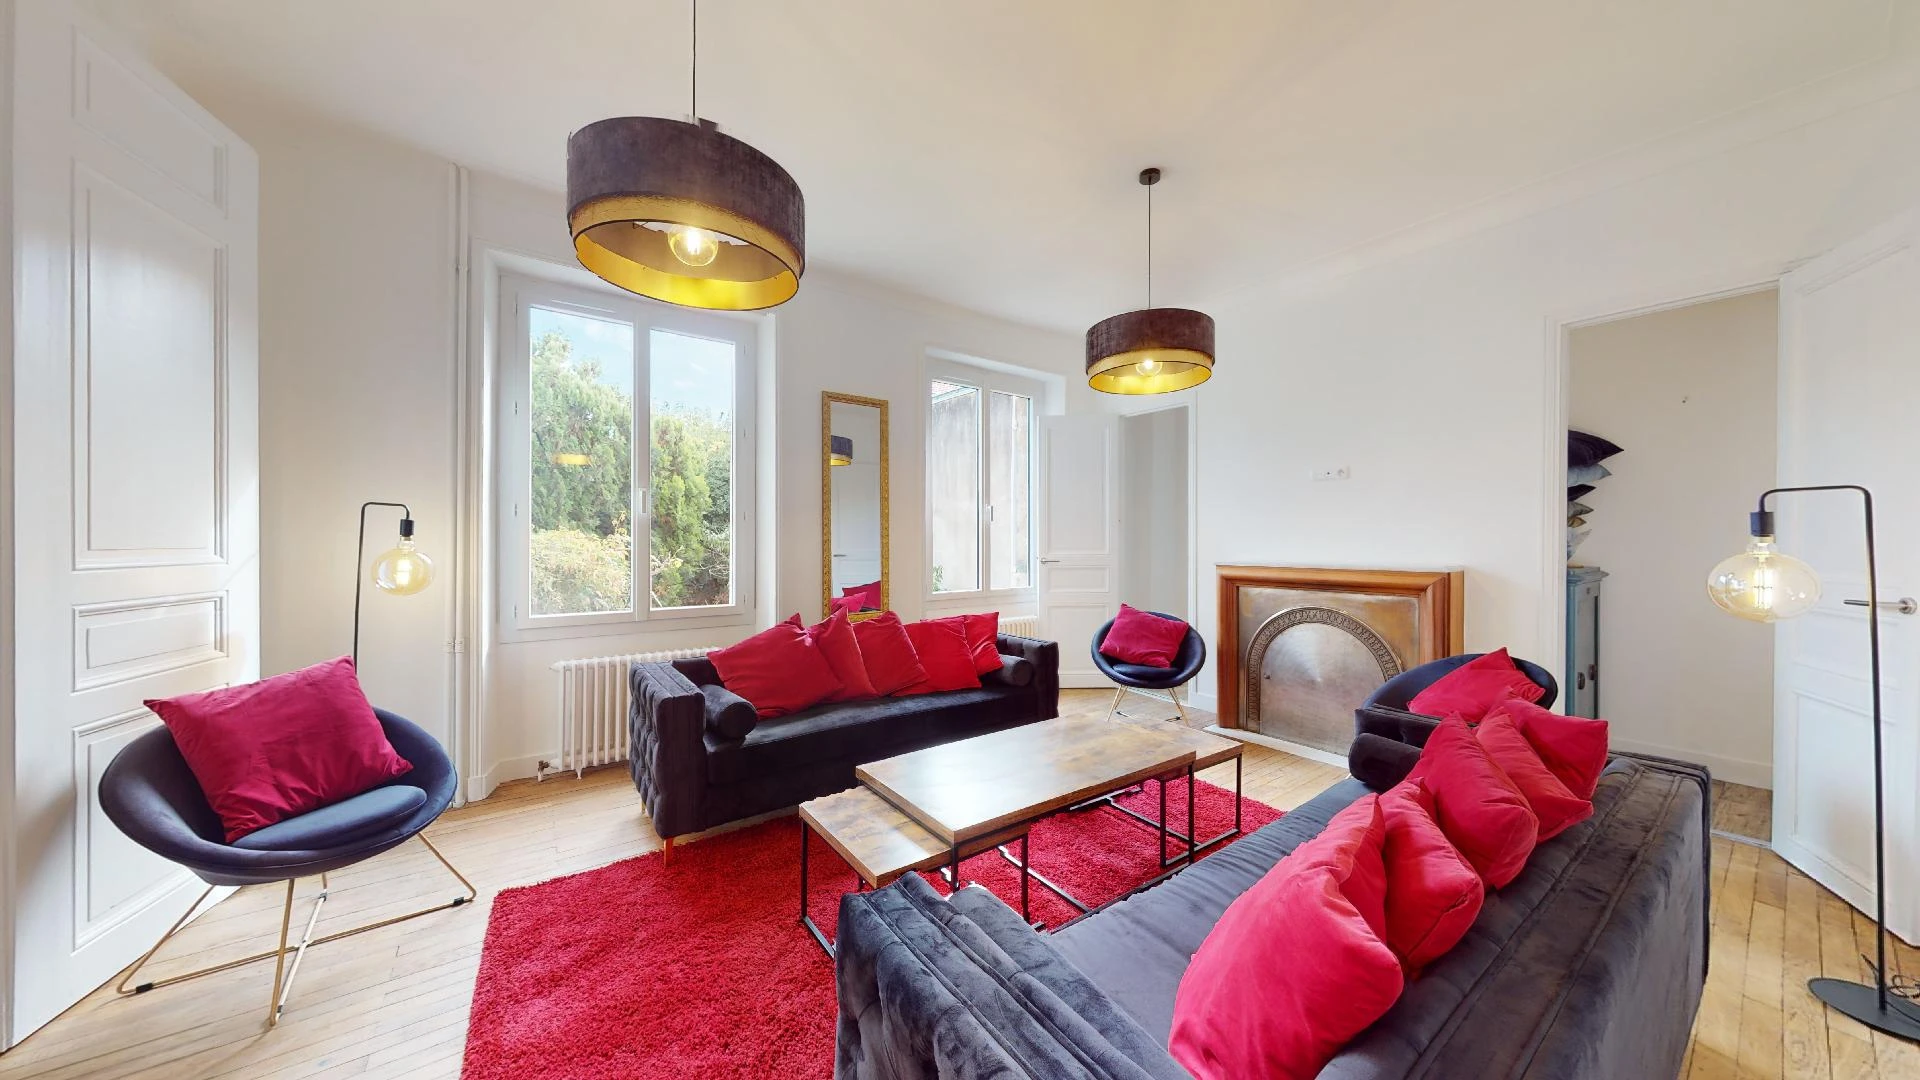 Renting rooms by the month in Nantes